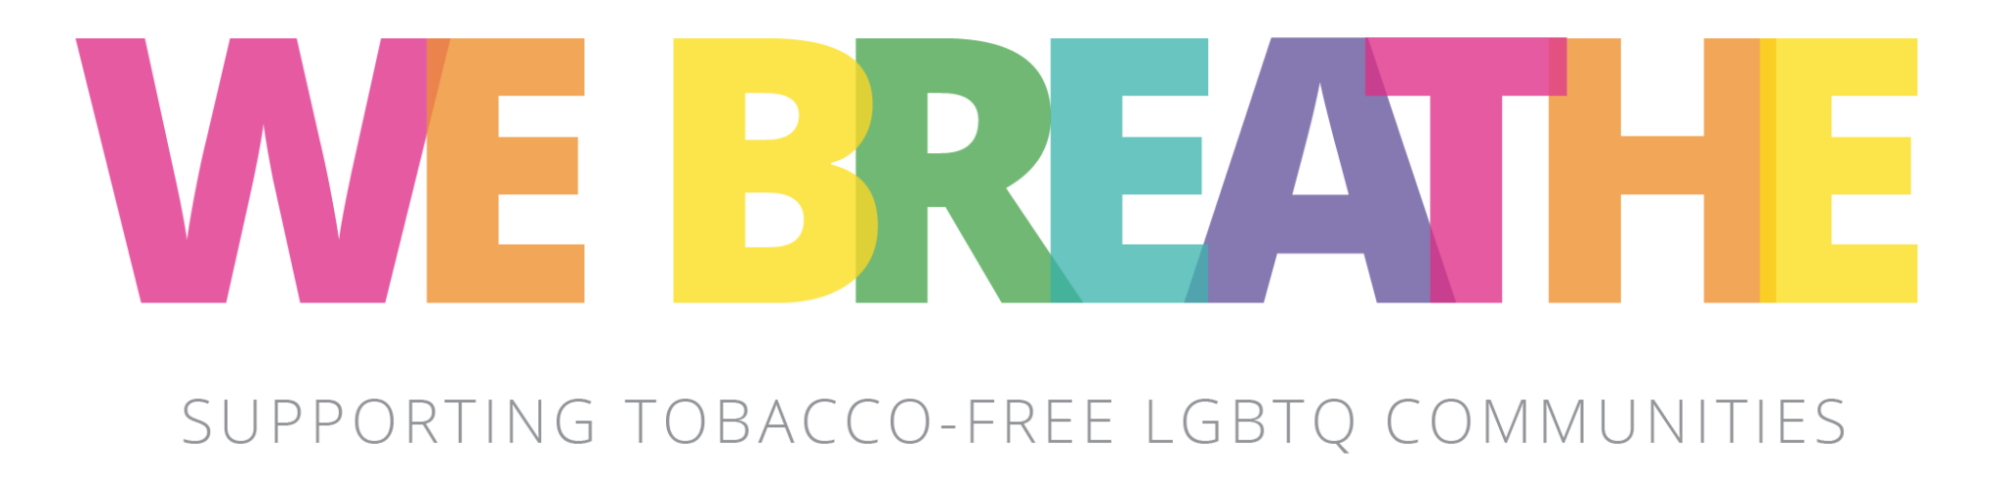 We Breathe (California LGBTQ Health and Human Services Network)